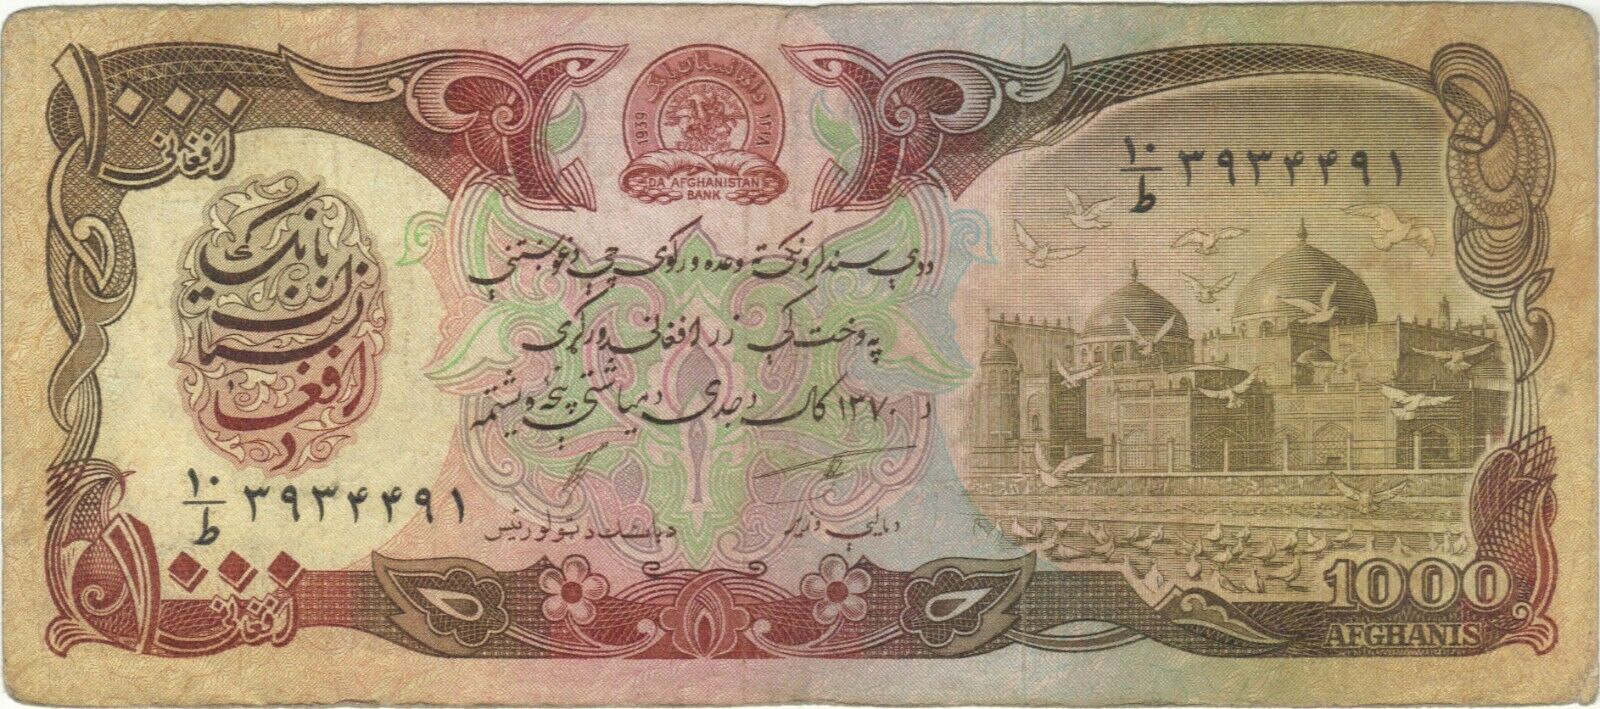 1979 1000 Afghanis Afghanistan Currency Banknote Note Money Bank Bill World Cash